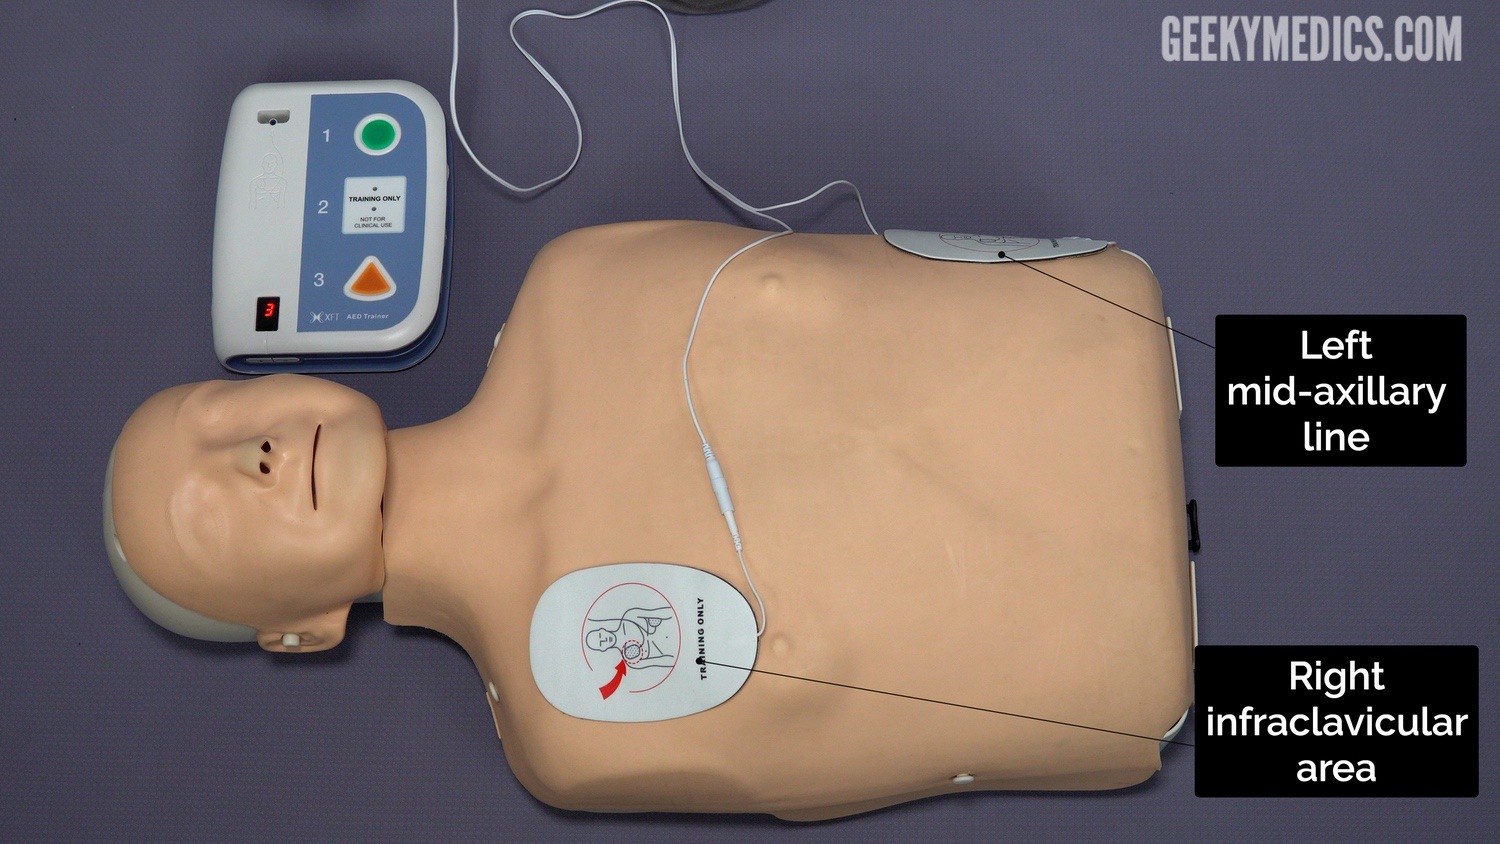 Attach the two self-adhesive pads immediately to the patient’s bare chest